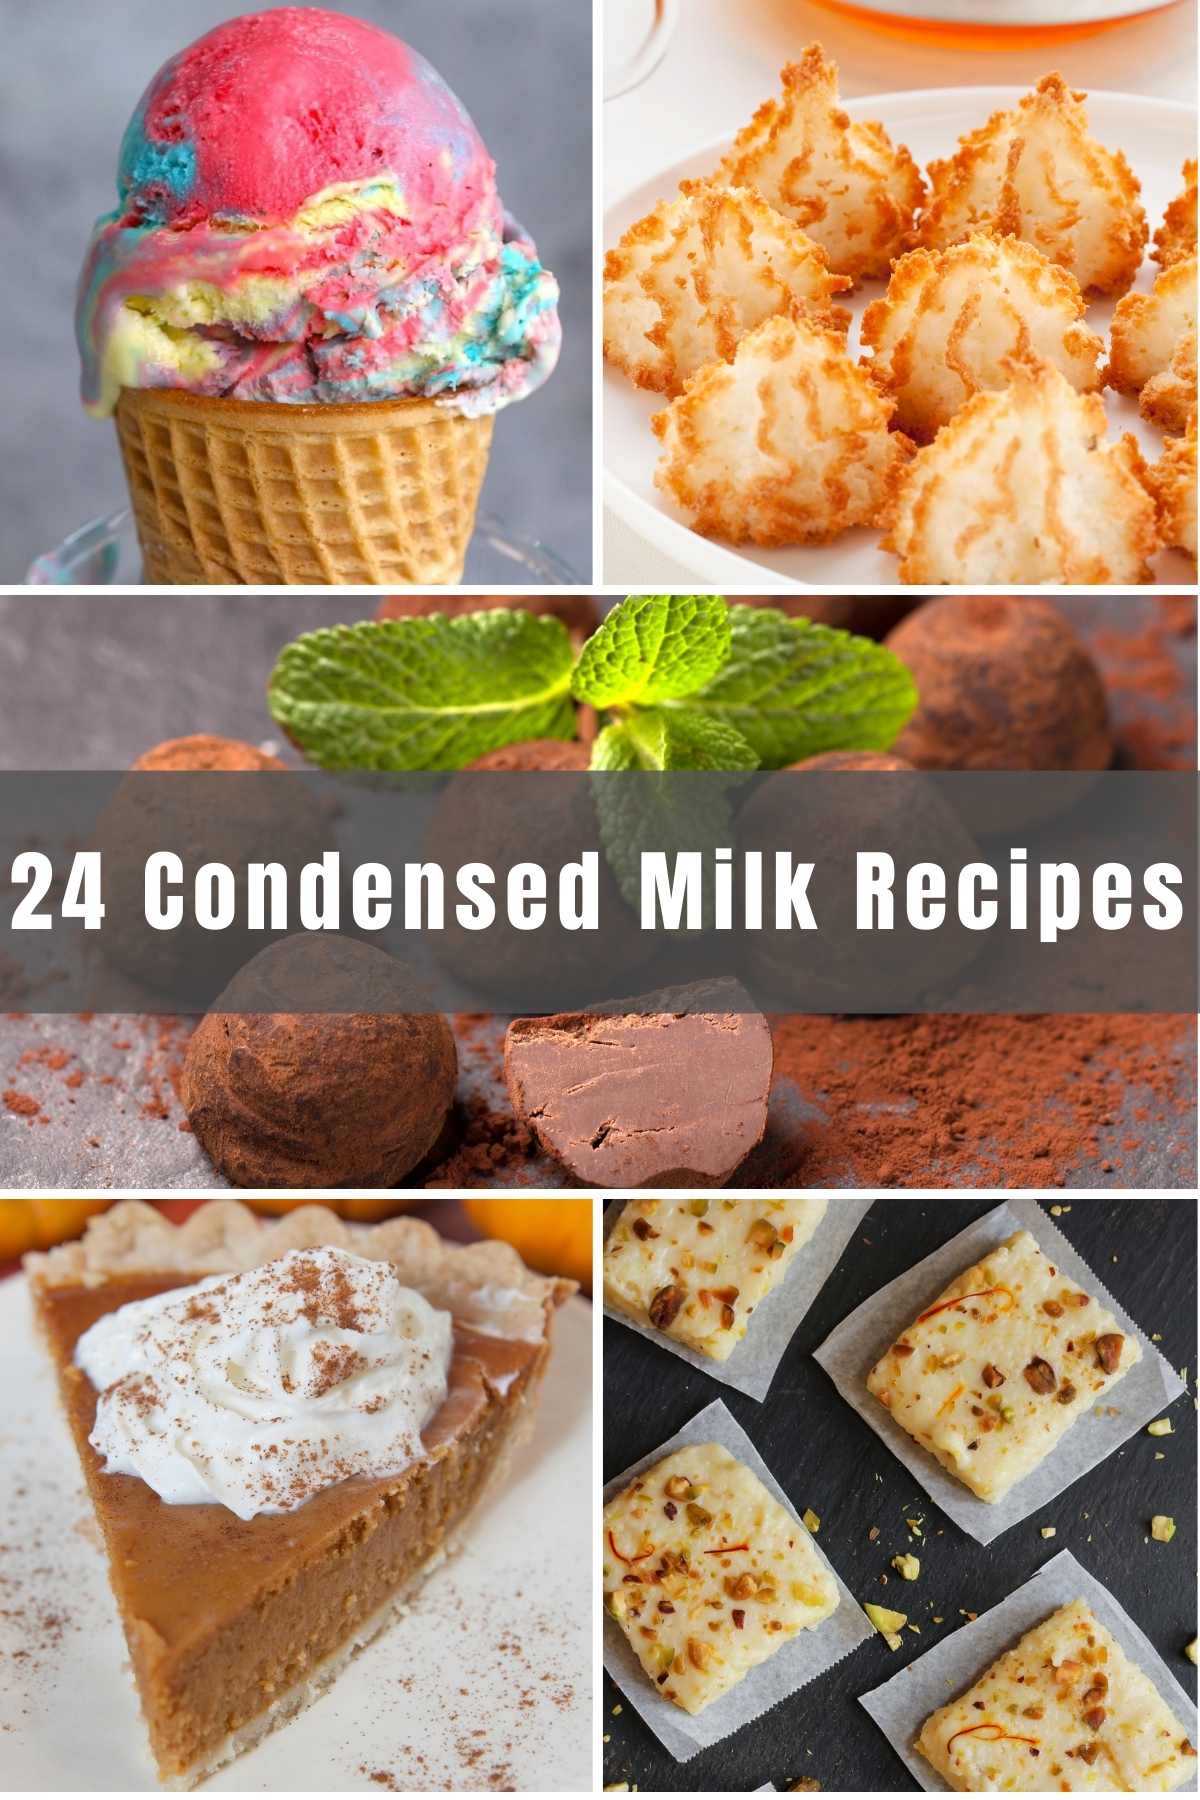 Condensed milk is that ingredient that you need, but haven’t gotten around to using it. Well, with these 24 Easy Sweetened Condensed Milk Recipes, you’re about to turn it into something amazing. In fact, you’ll probably need to run out and grab more!